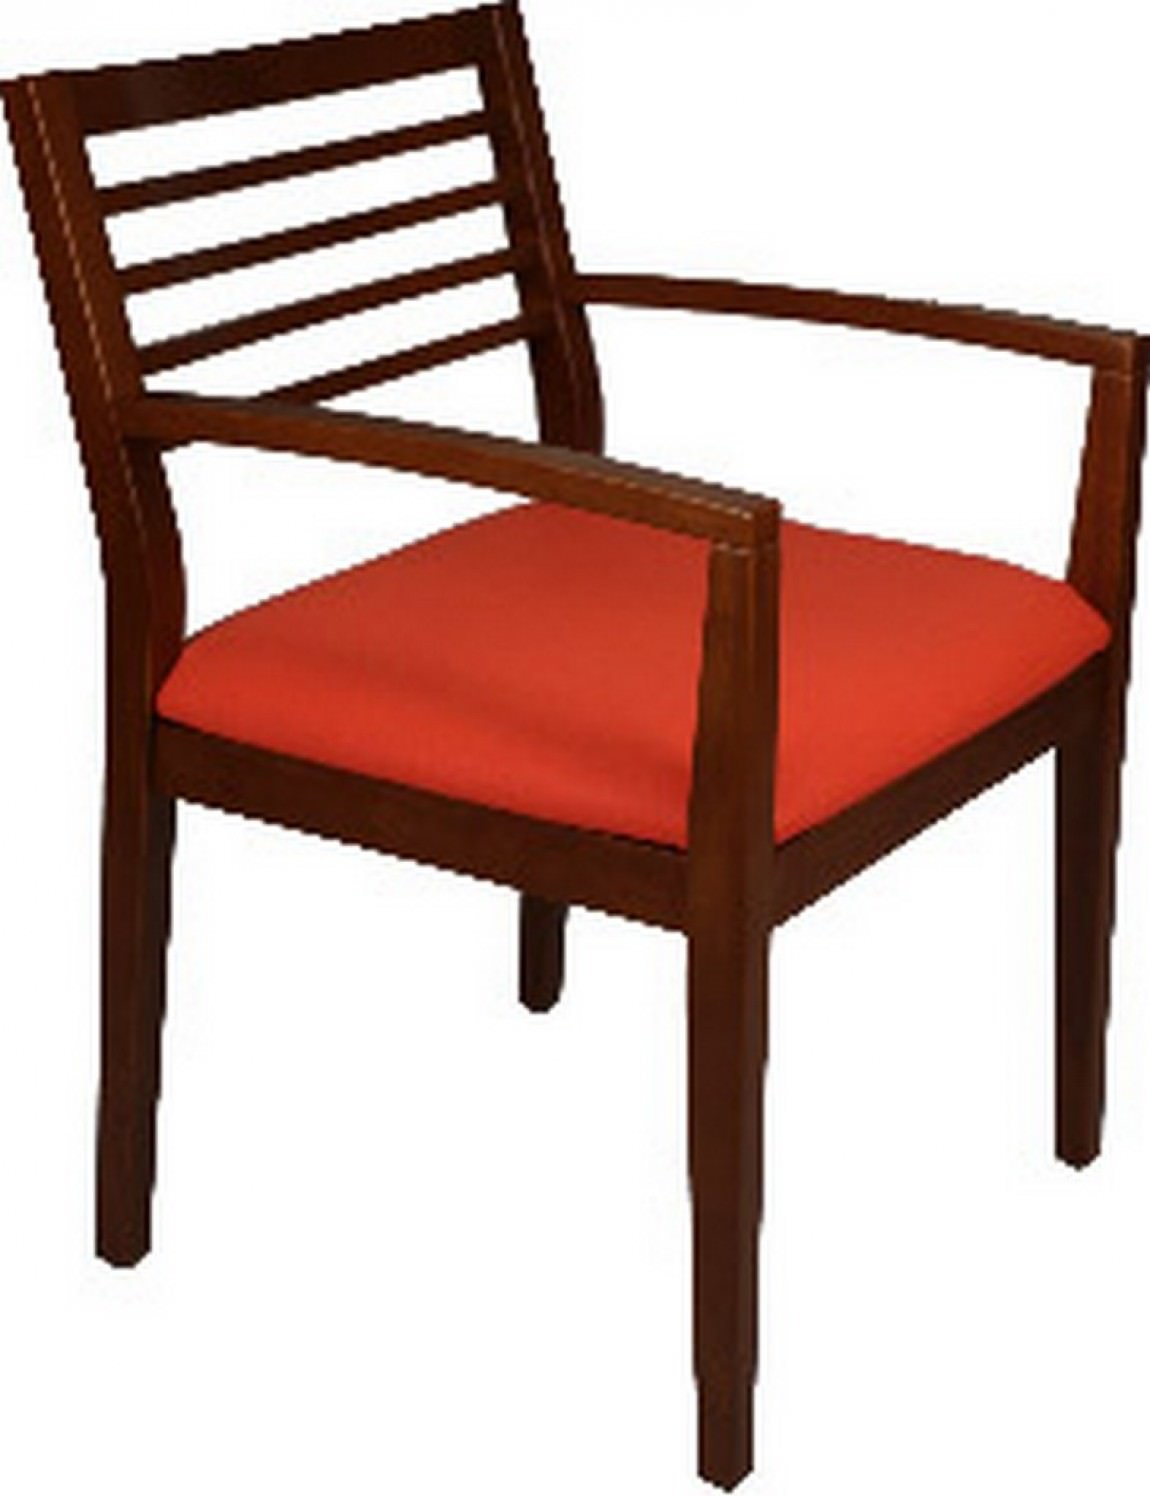 Wood Frame Guest Chair with Slatted Back